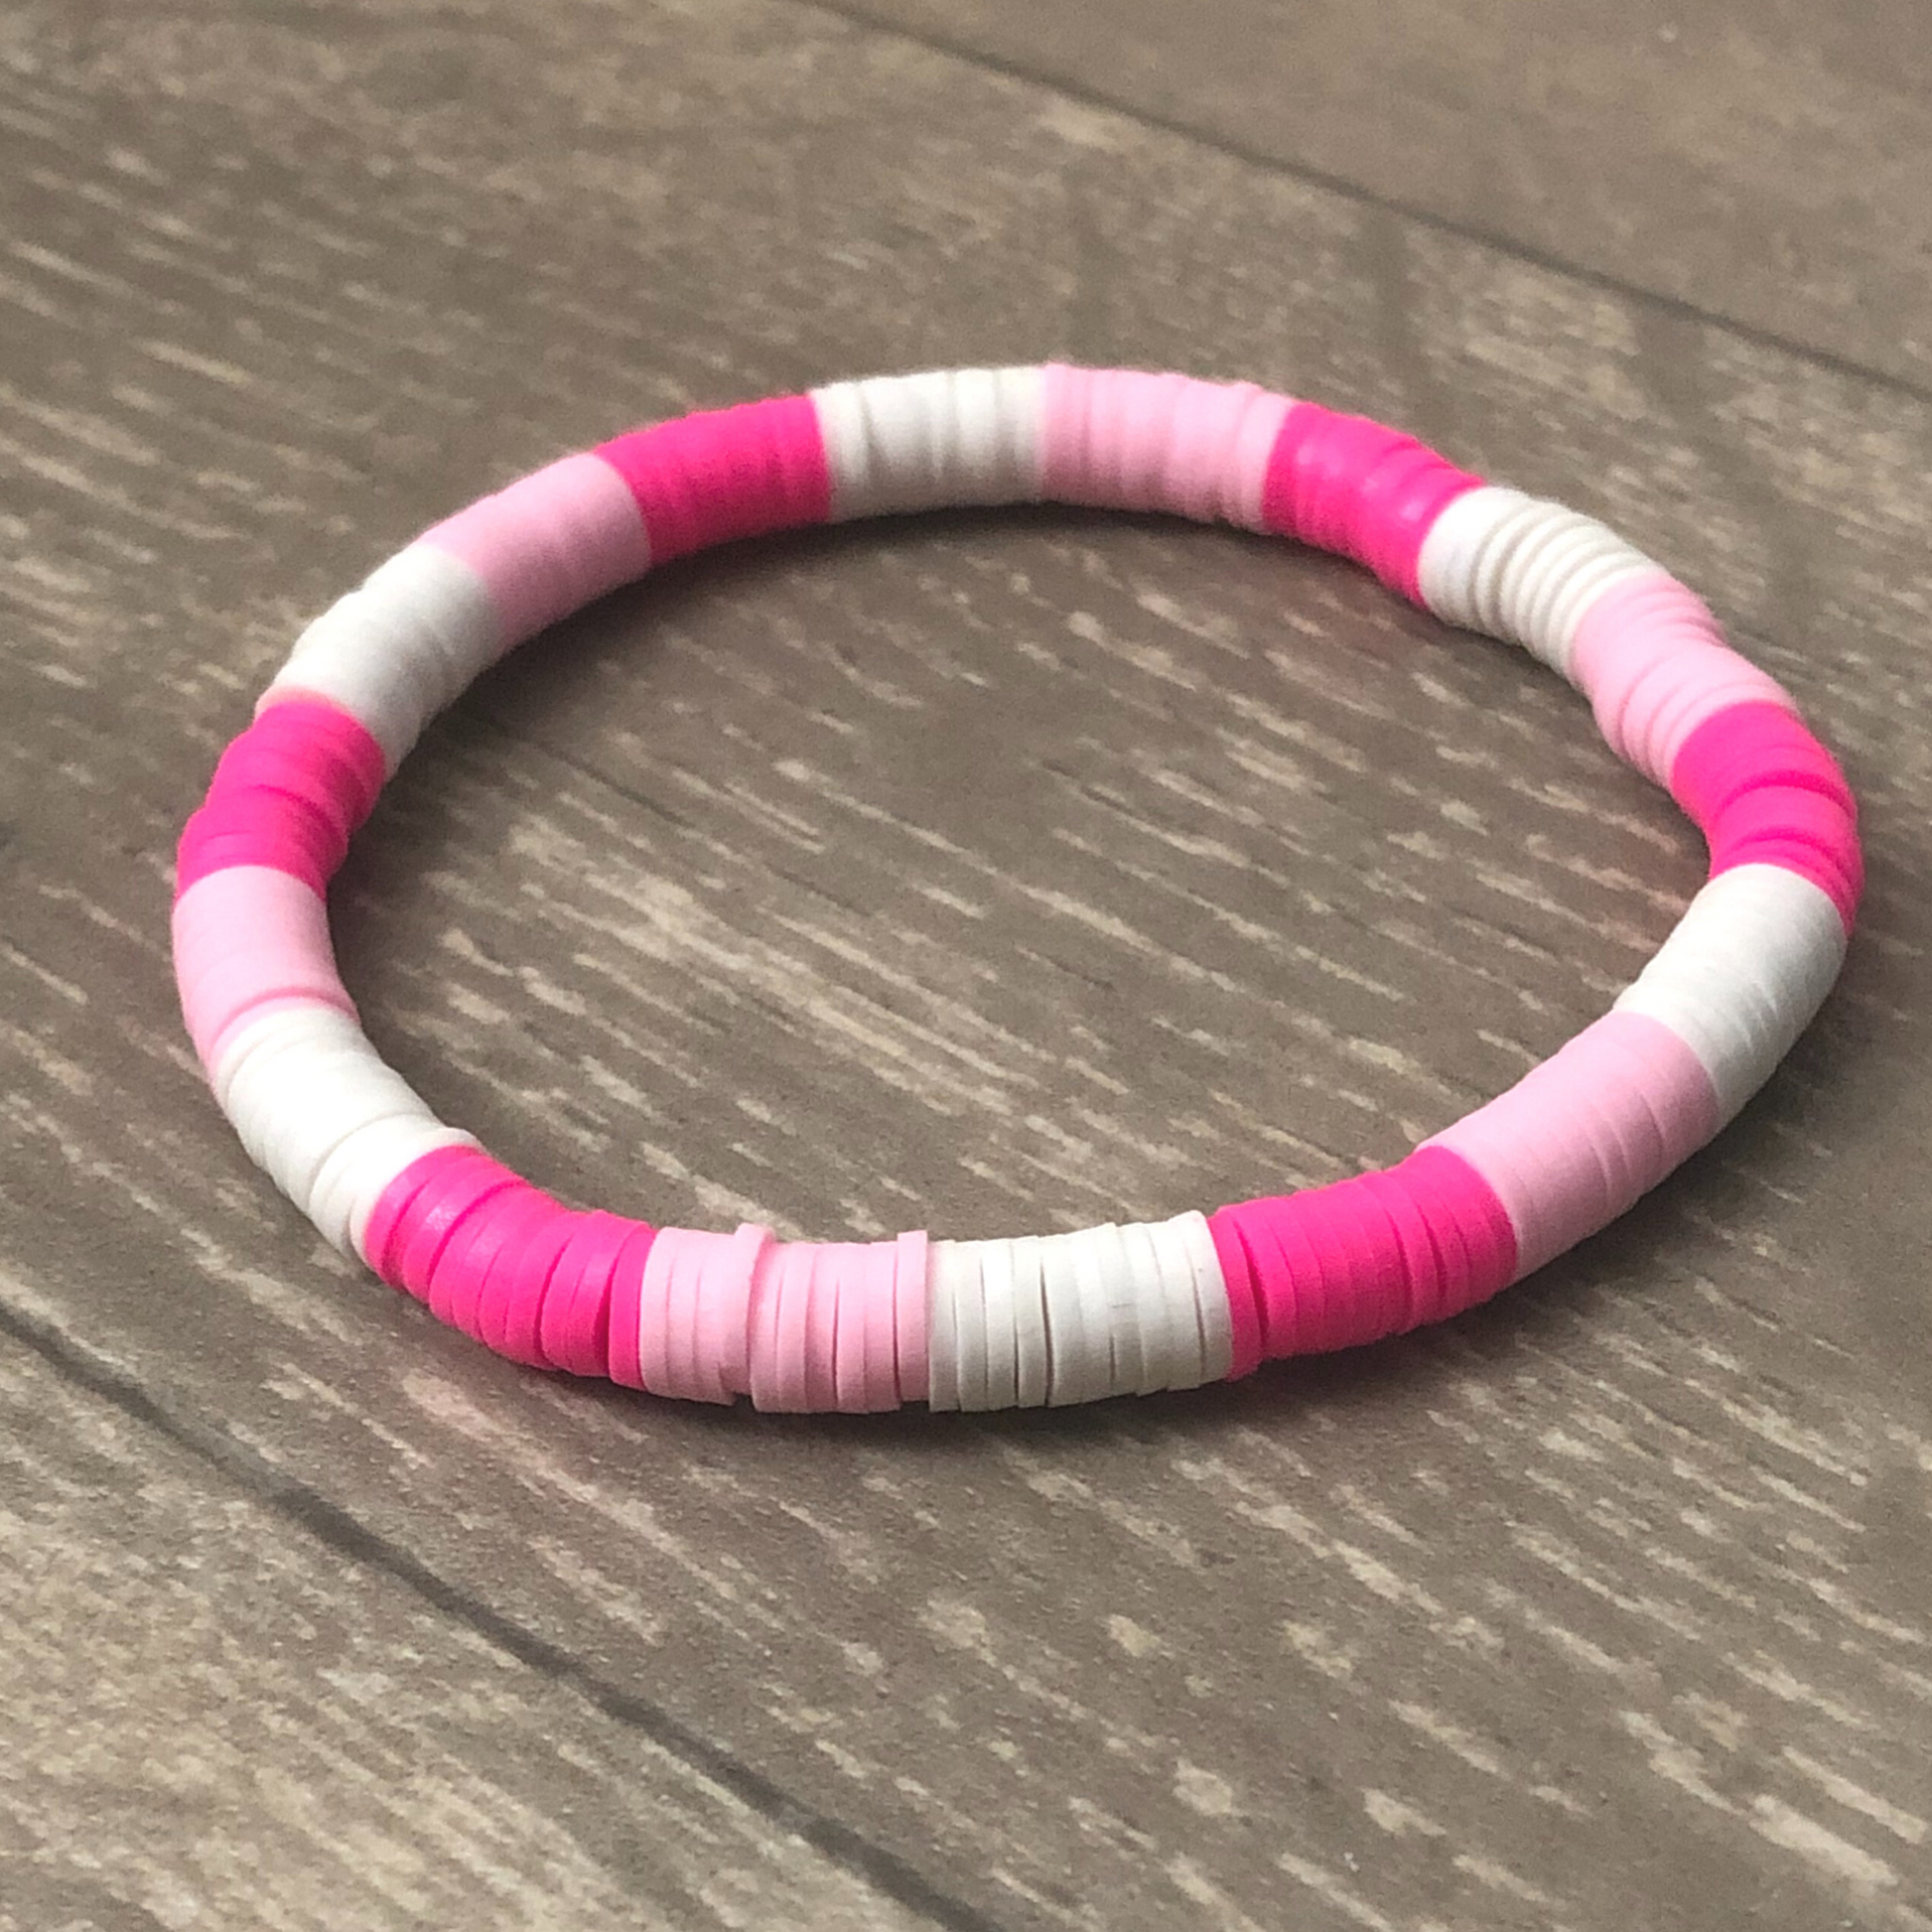 Pink, Green and Blue Clay Beaded Bracelet 